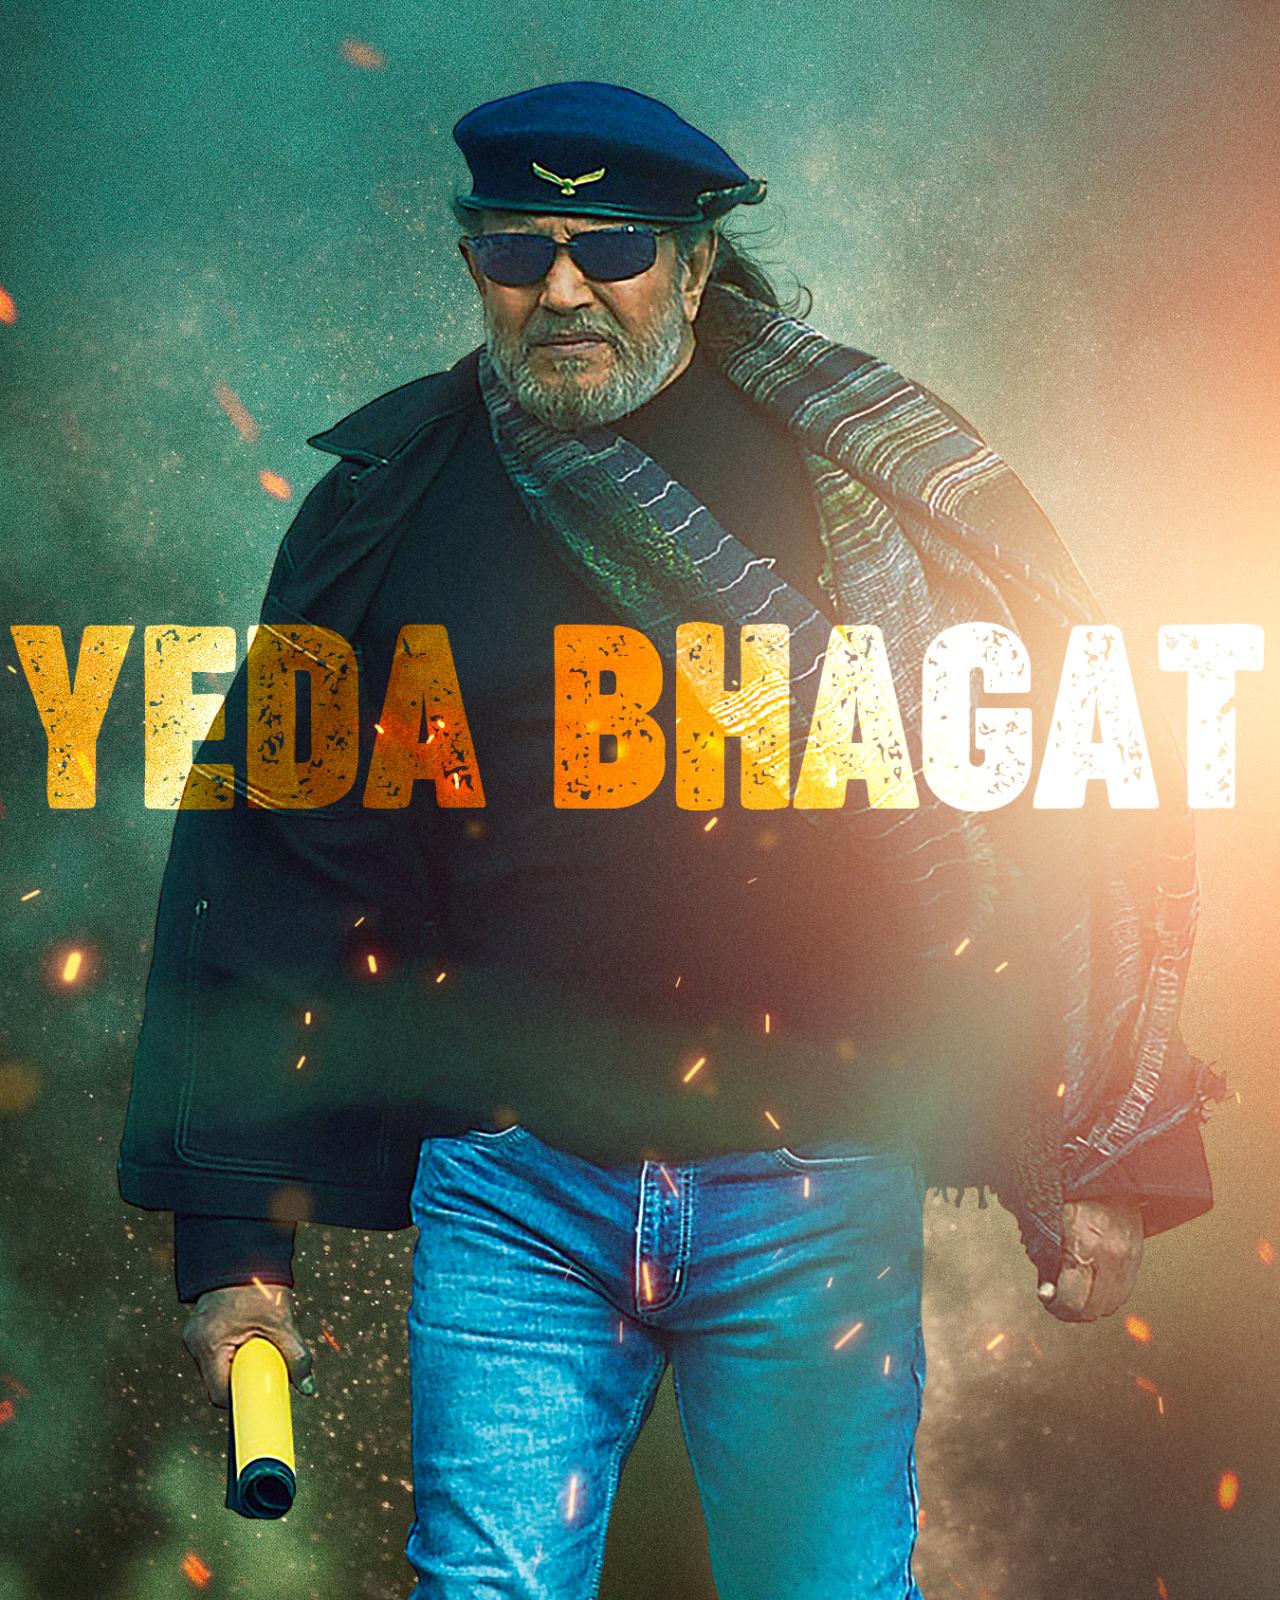 Walking in full swag, wearing a hat and cool shades, Mithun has the quirkiest name among the lot. His character has been introduced as Yeda Bhagat